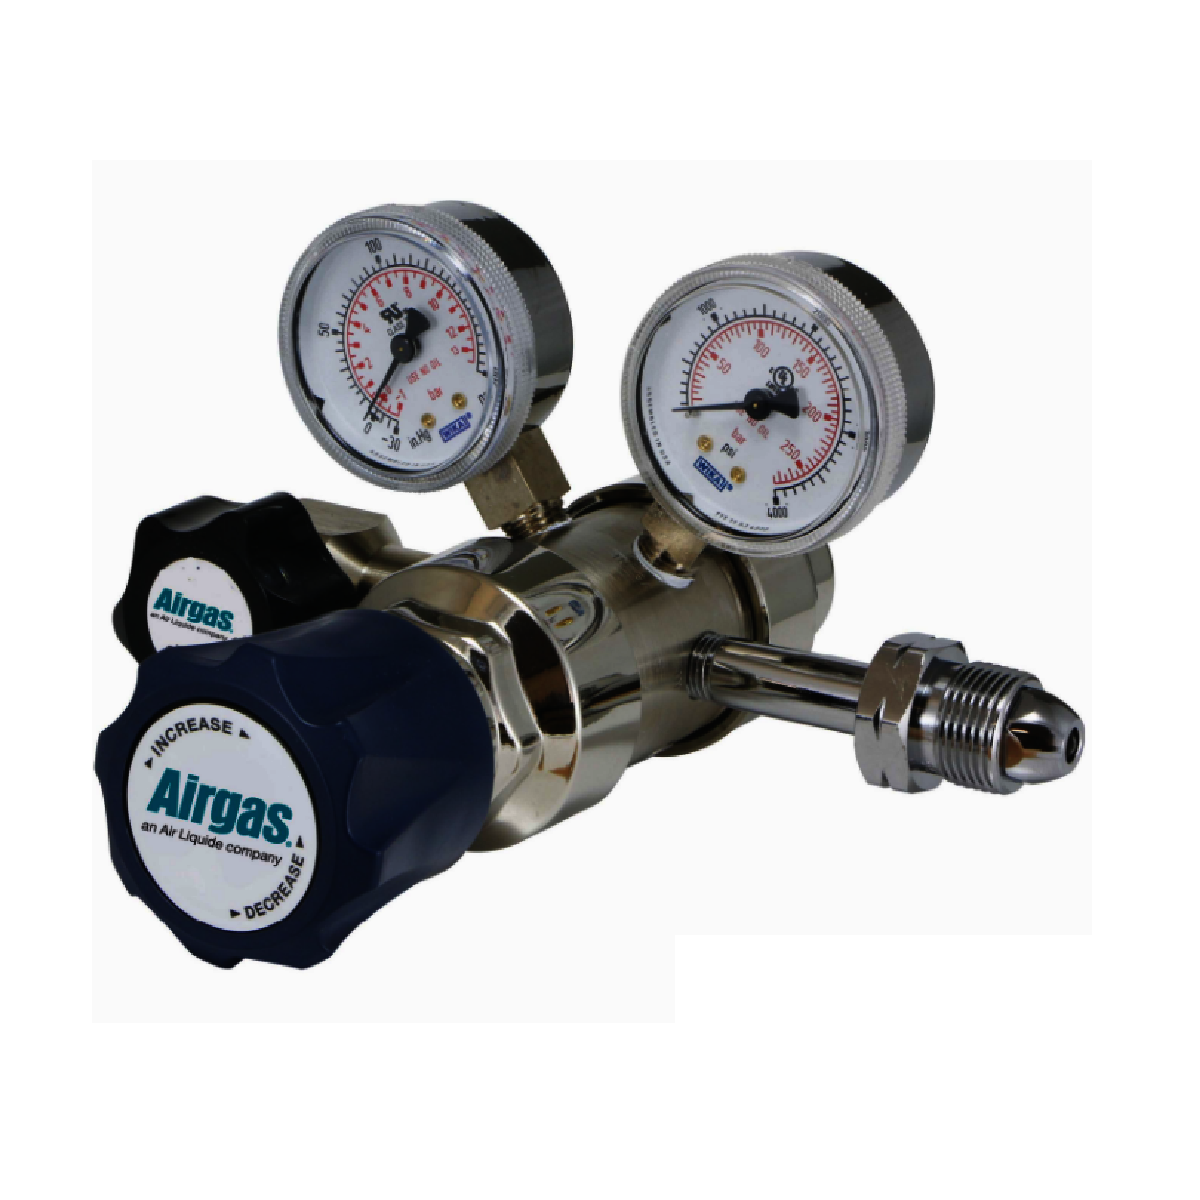 Airgas Model 311D350 Brass-Plated Bar Stock Noncorrosive Gas Two Stage Regulator With CGA-350 Connection